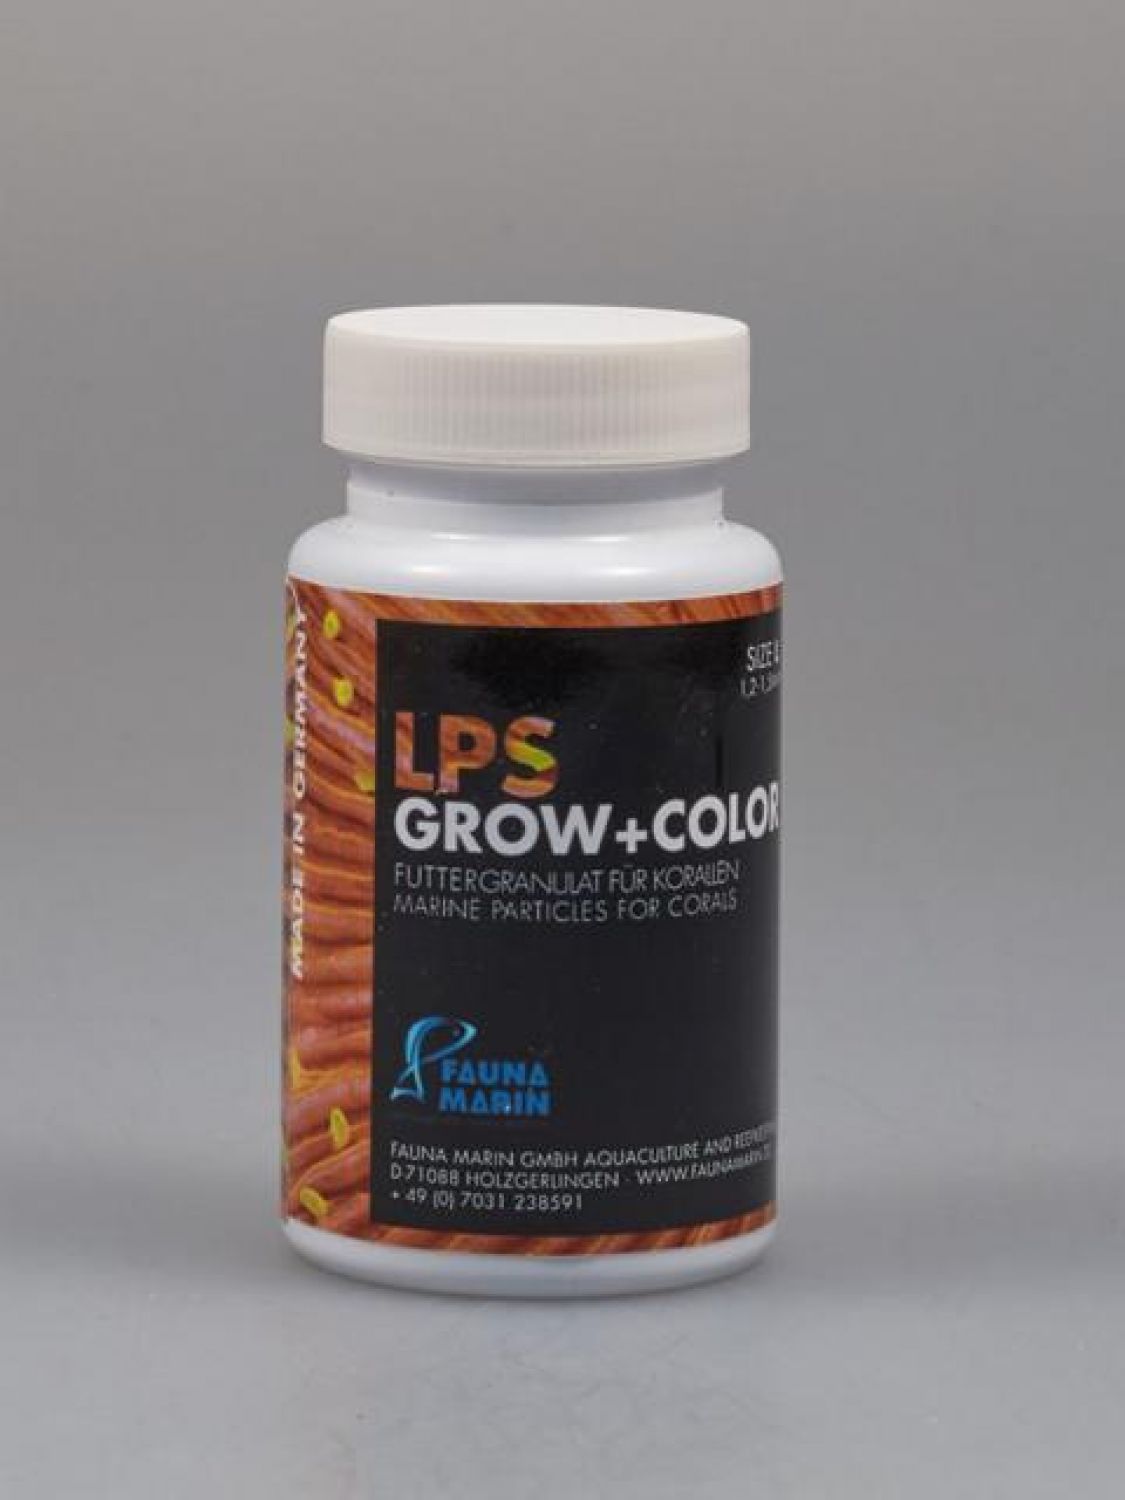 Fauna Marin - LPS Grow and Color L 100 ml / 60 gr